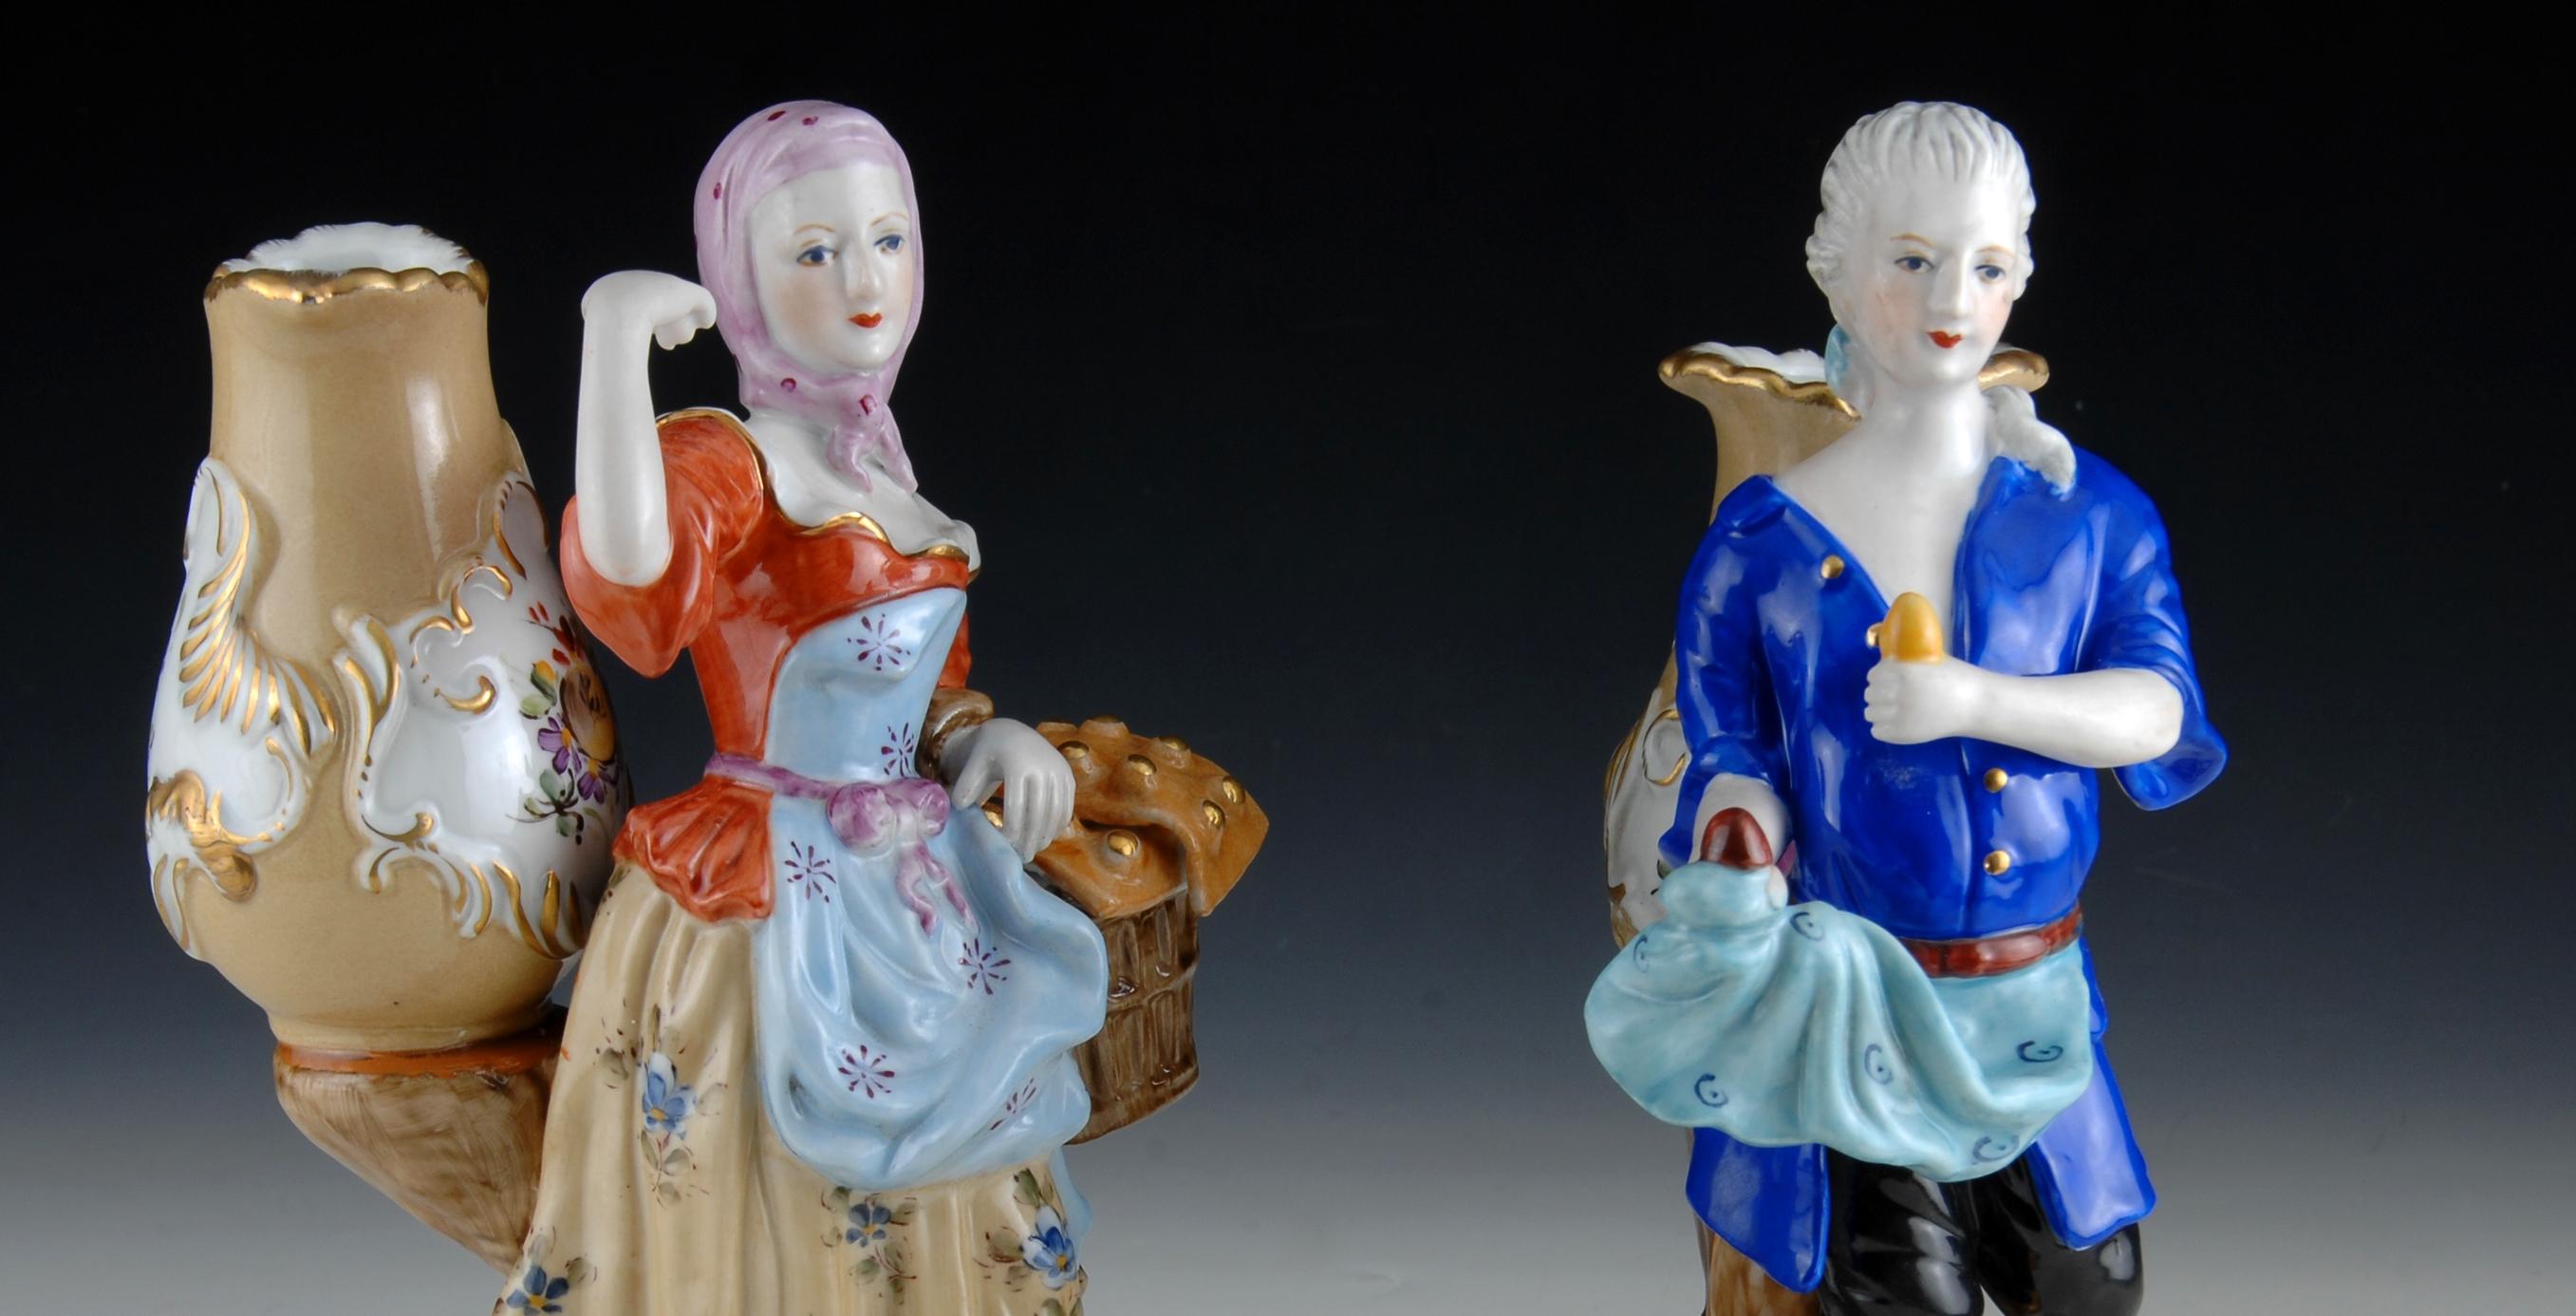 Other Pair of Figures with Vases, Porcelain, 20th Century